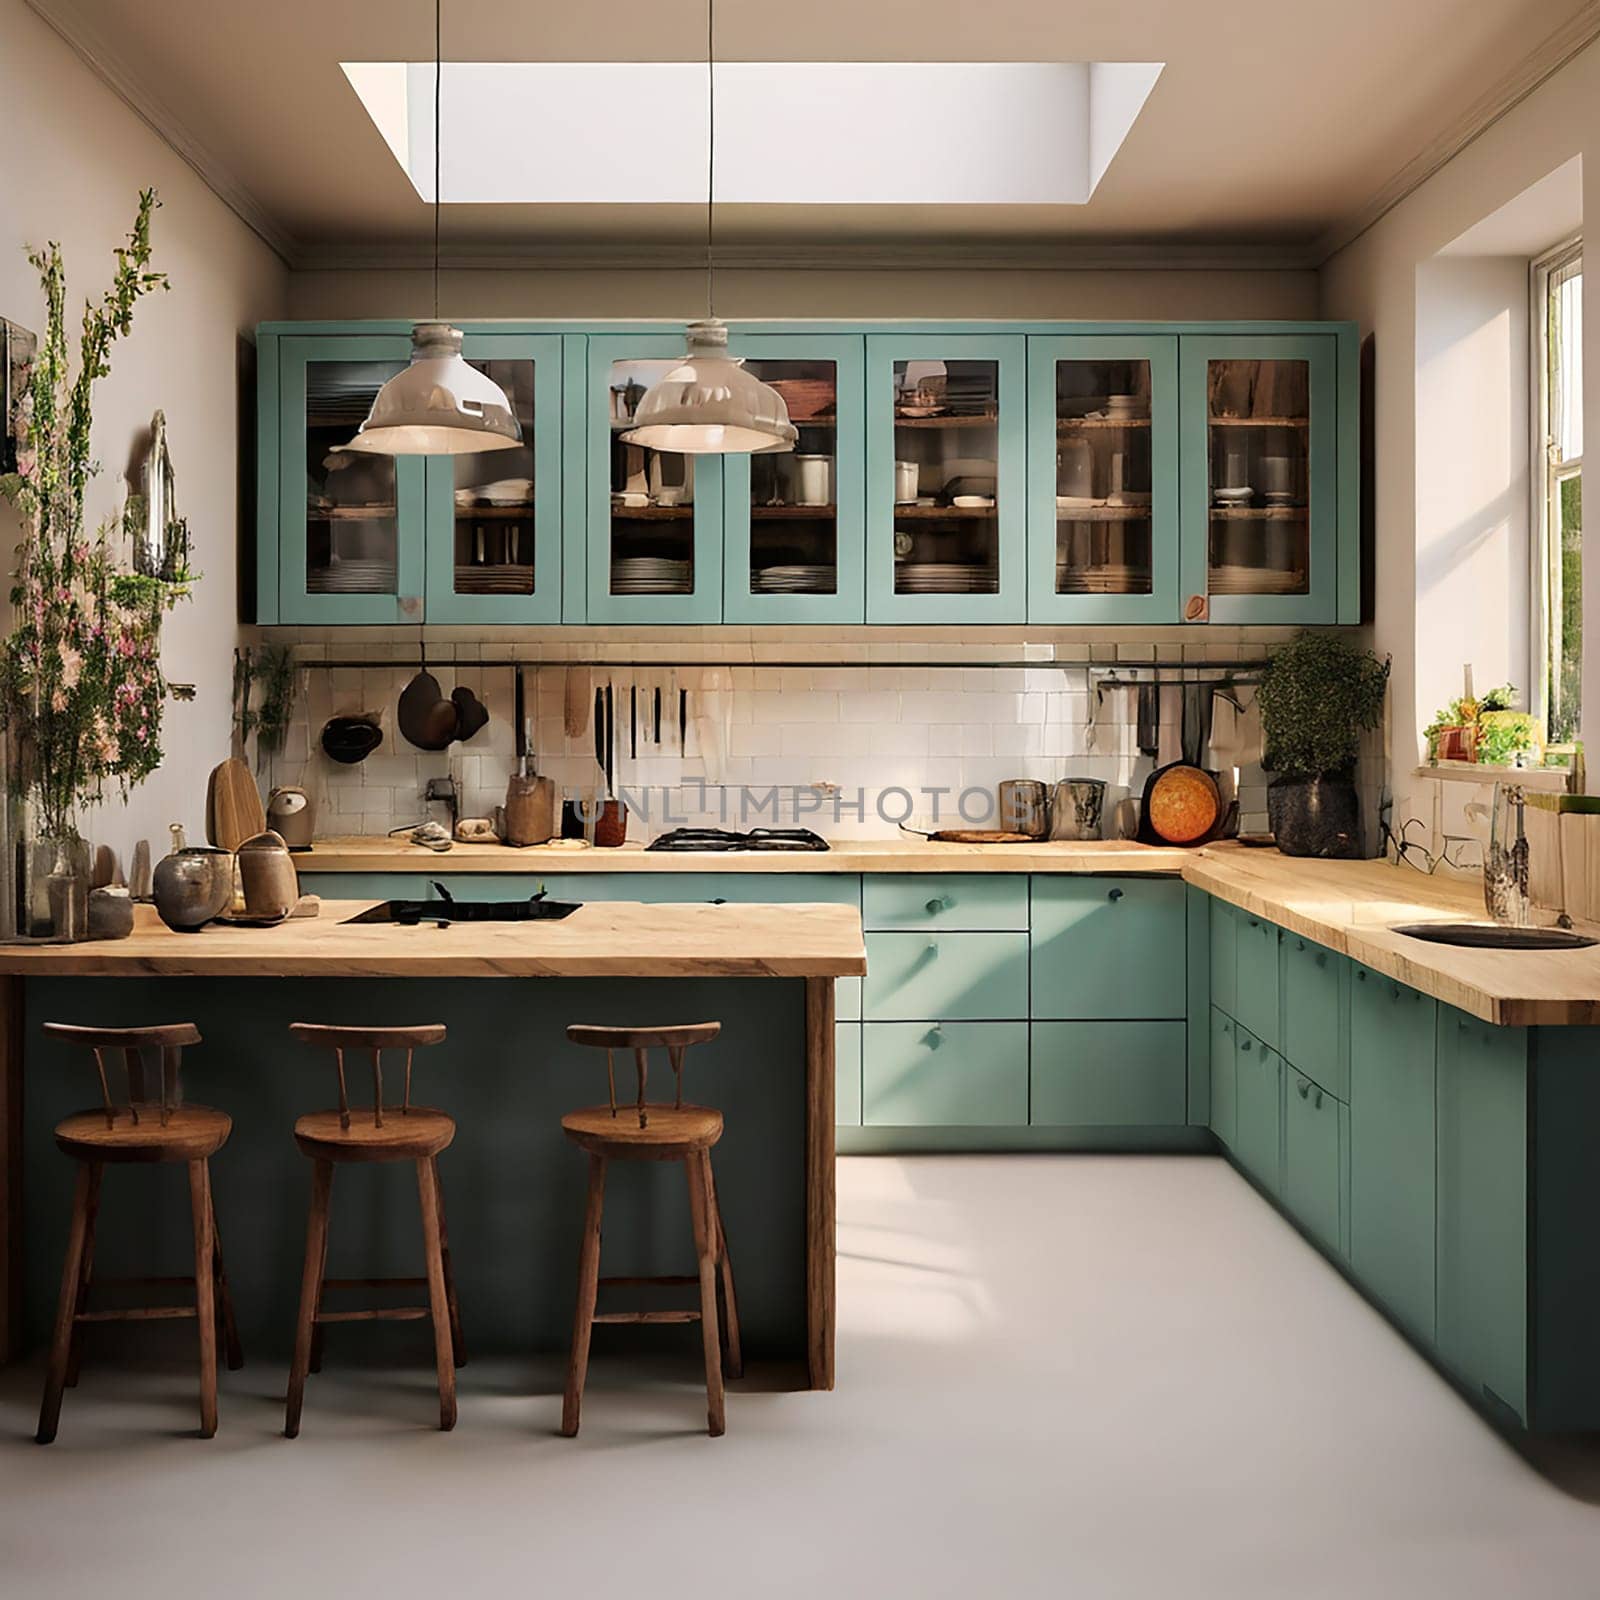 The Beauty of Simplicity: Minimalist Kitchen Design Ideas by Petrichor